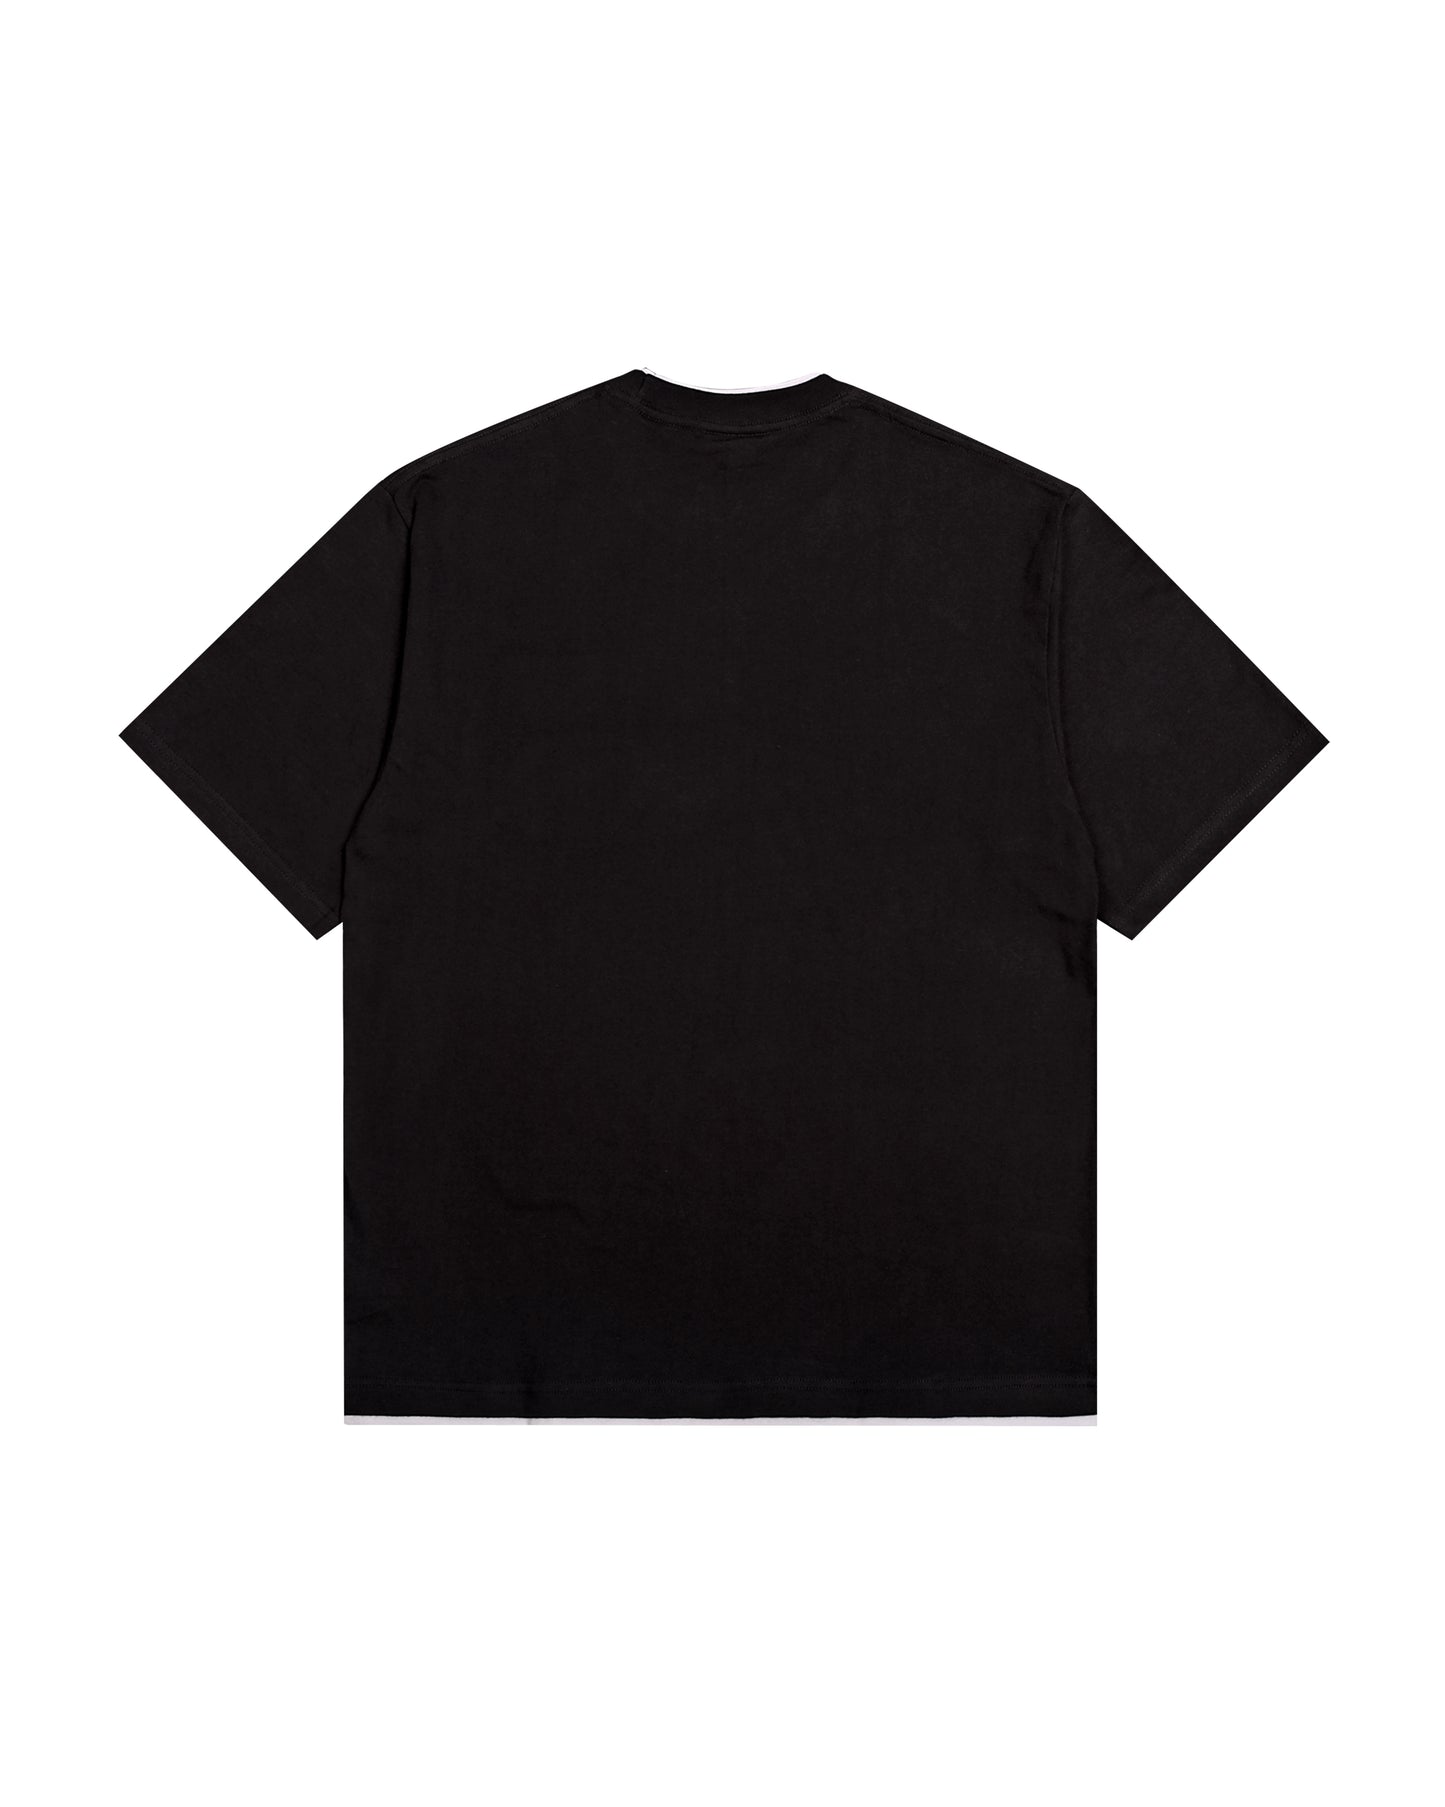 Macto Black Relaxed Fit Tees